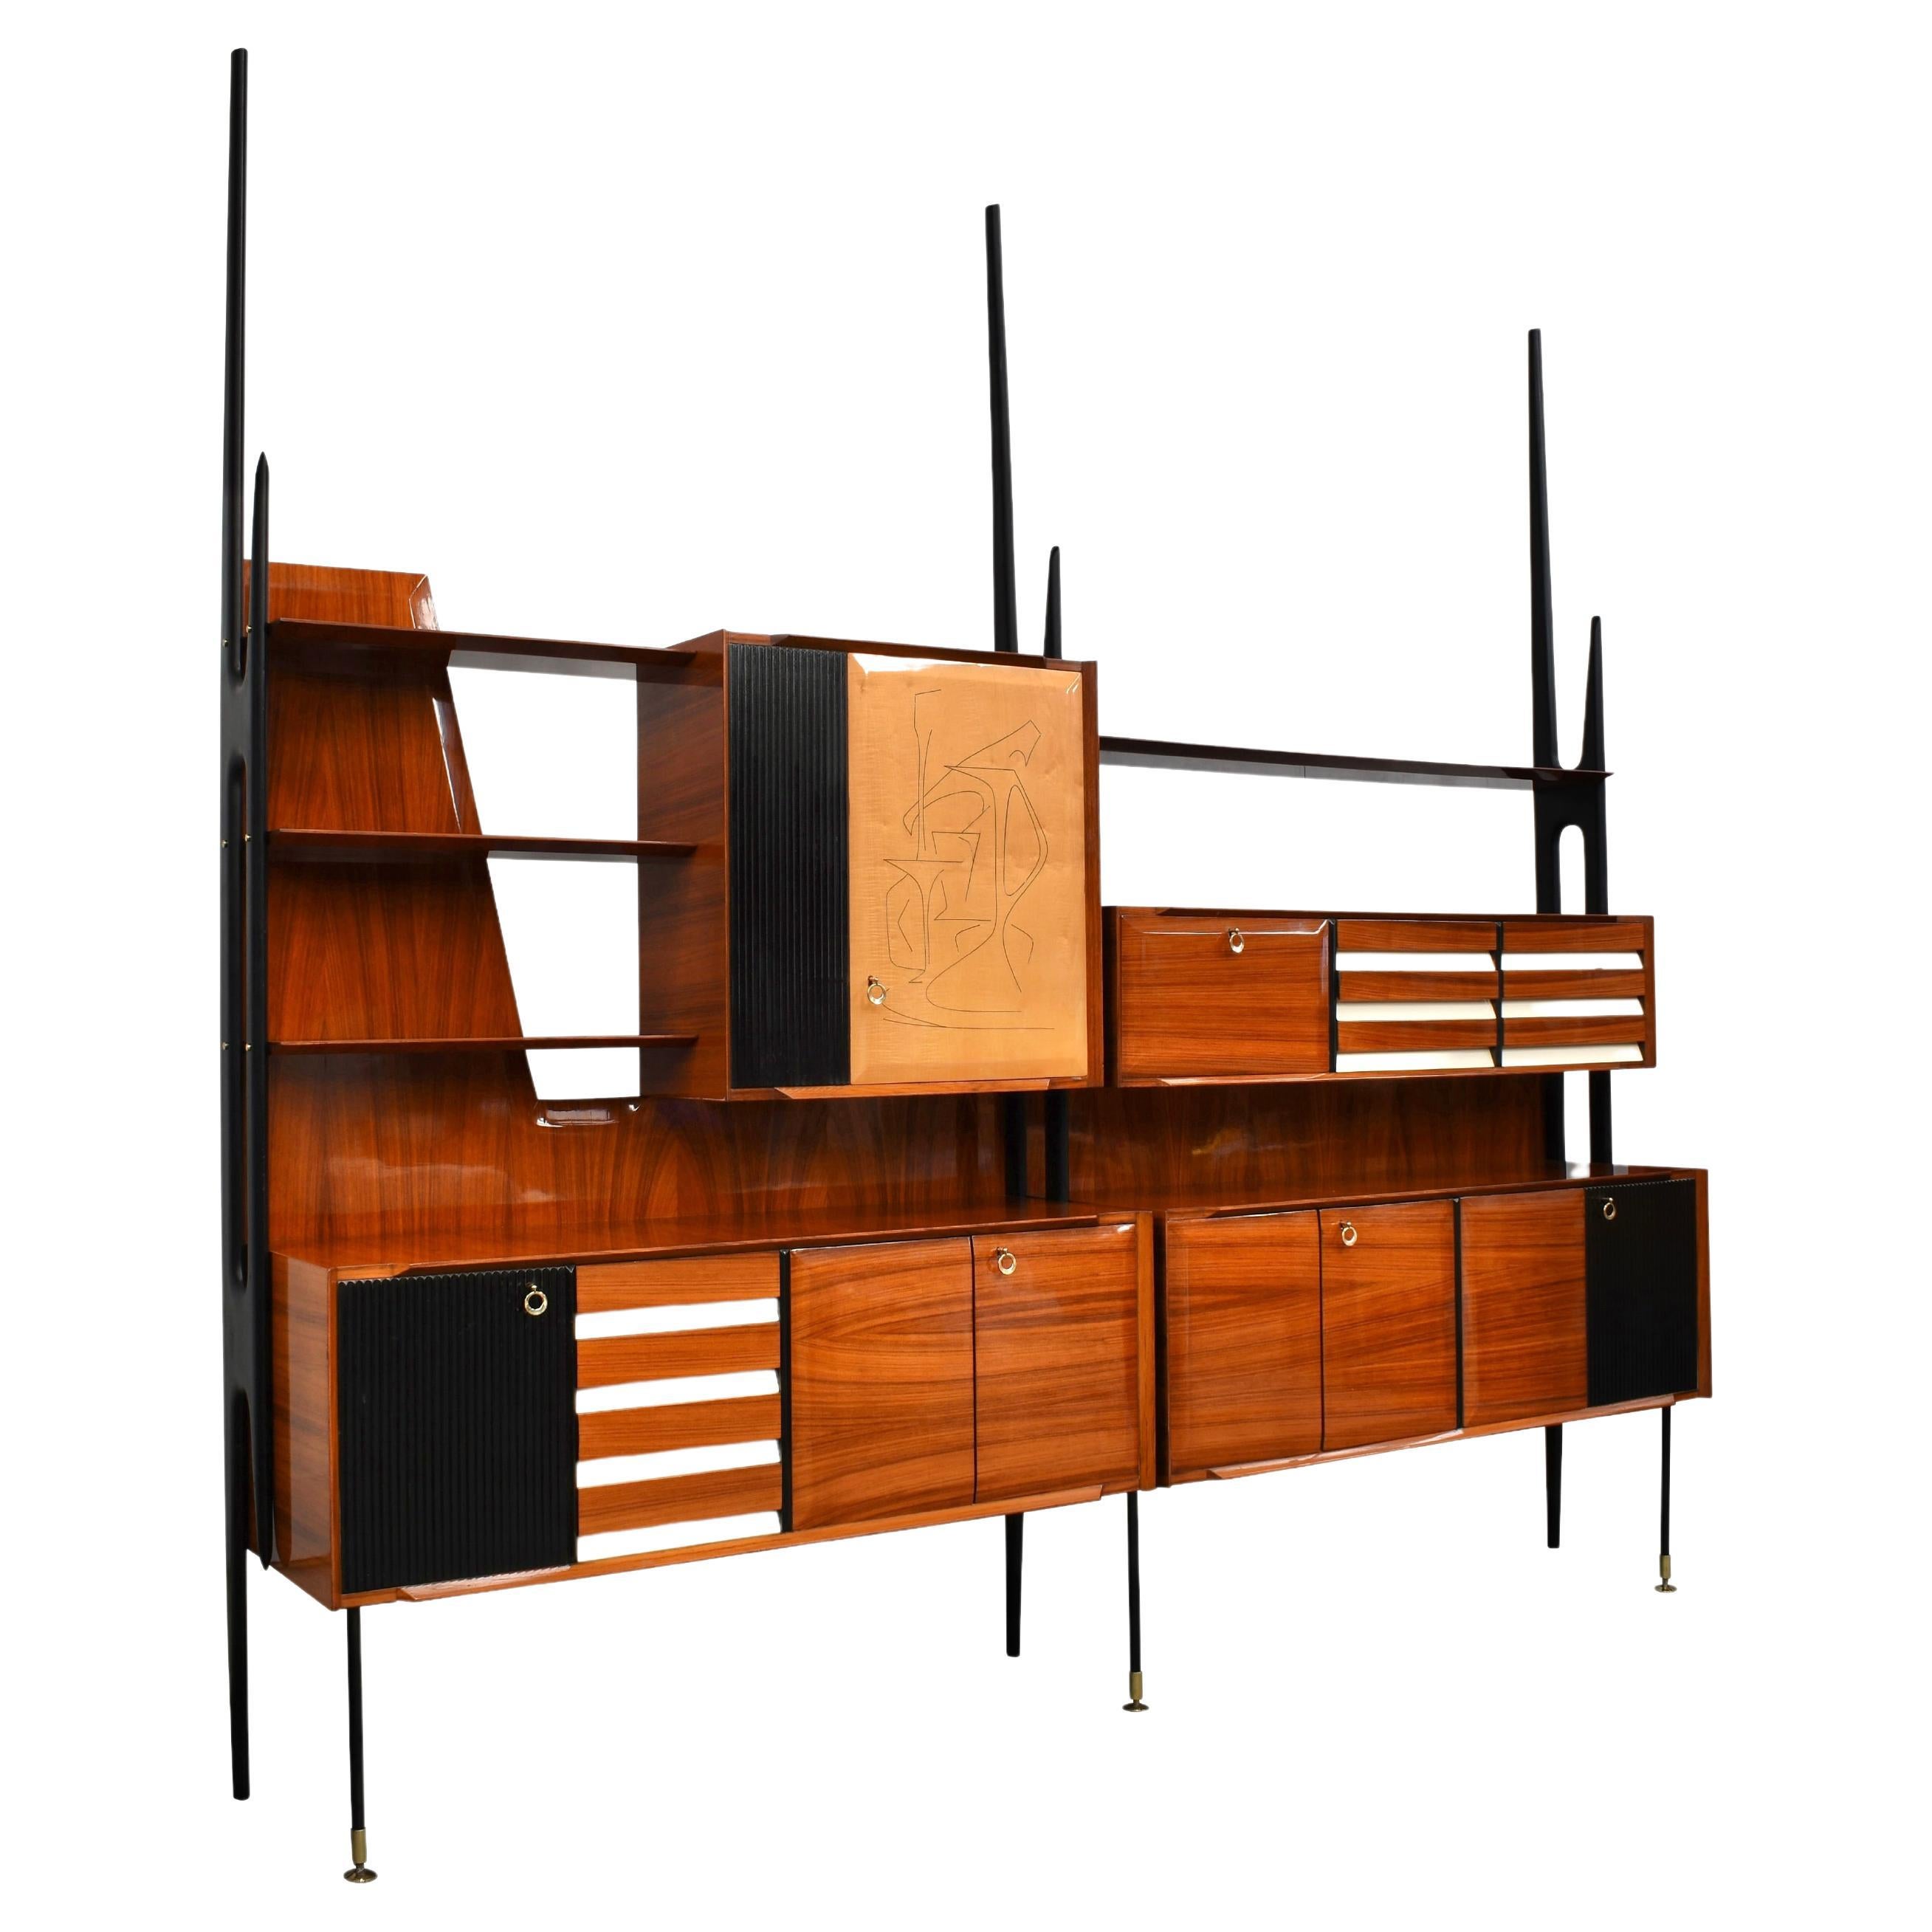 Vittorio Dassi Monumental Wall Unit / Dry Bar for Mobili Cantù, Italy, 1950 For Sale